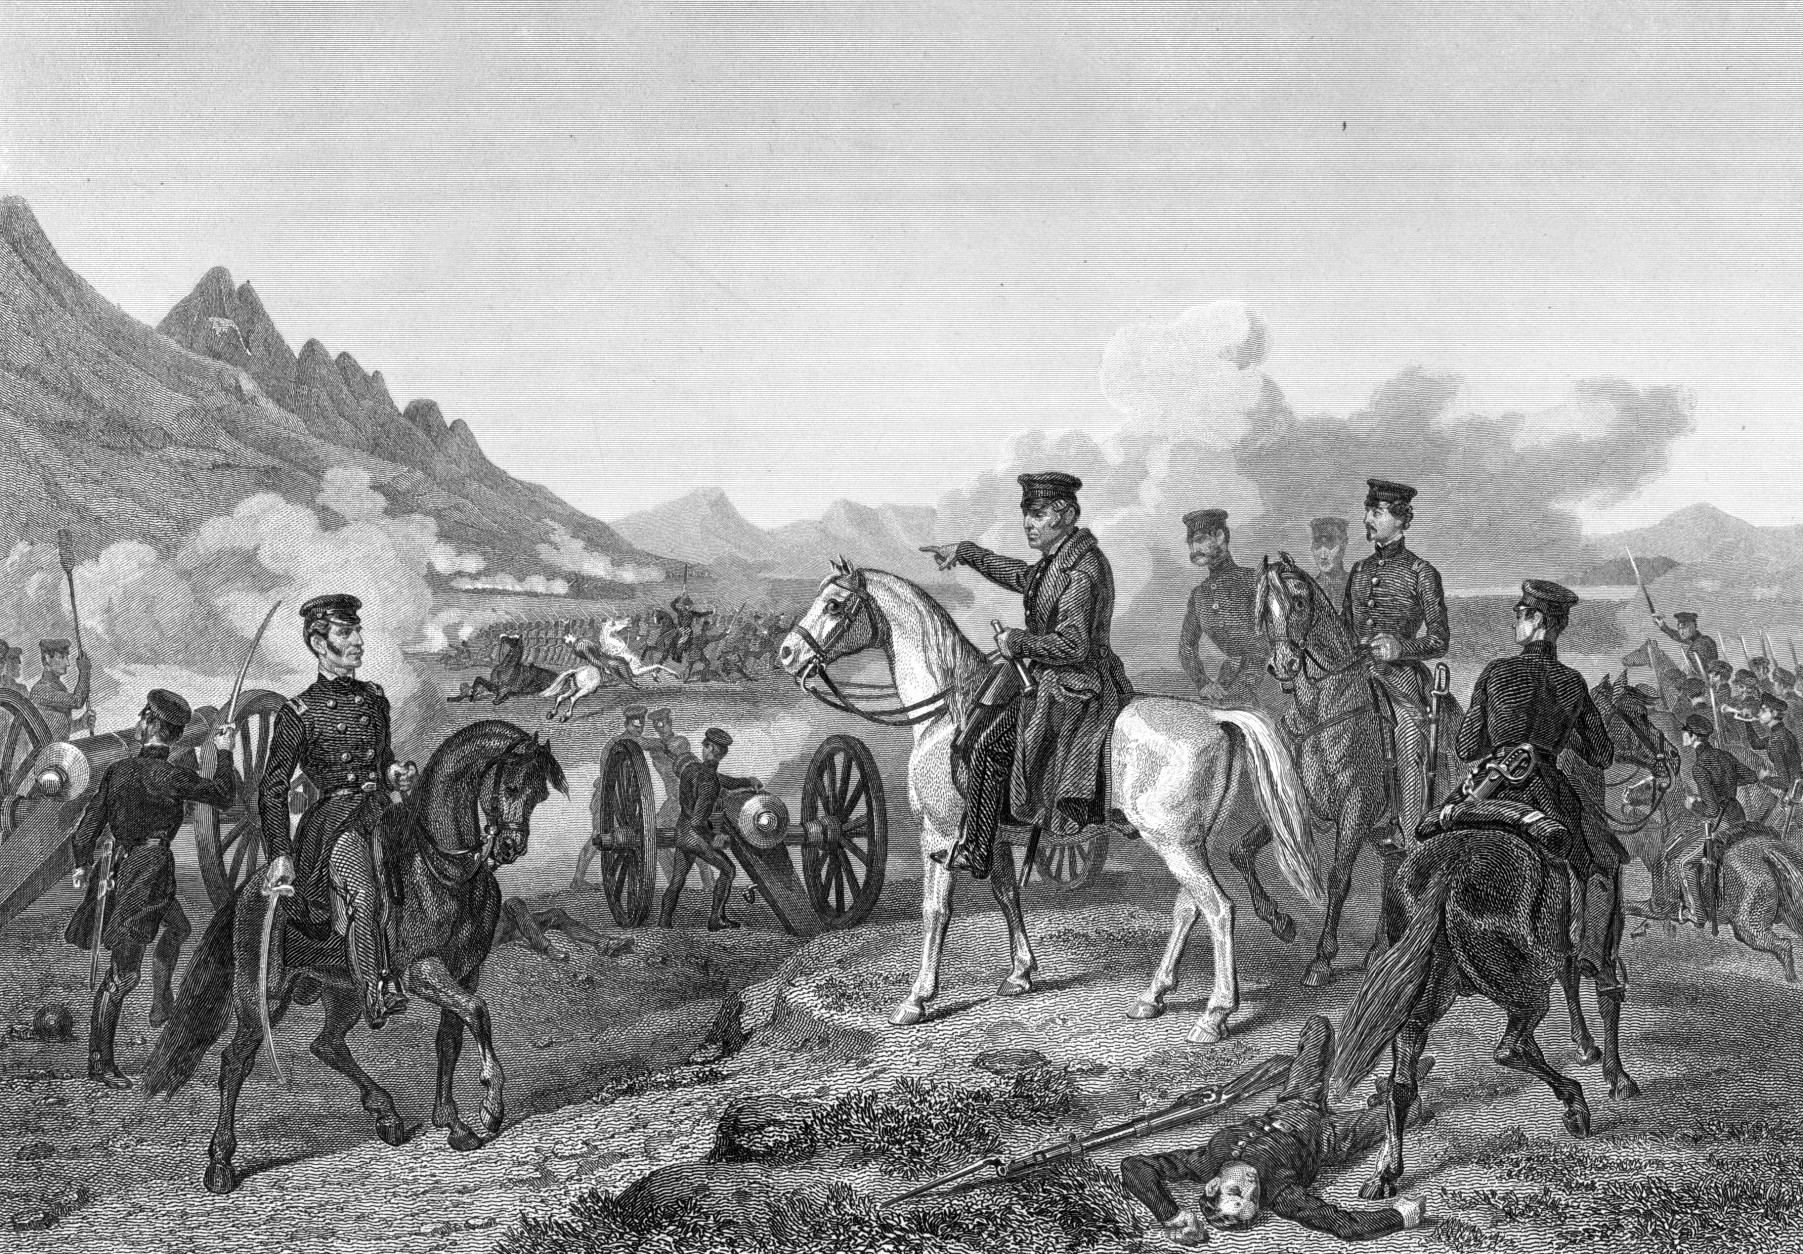 23rd February 1847:  American army general Zachary Taylor (1784 - 1850), directing his troops at the Battle of Buena Vista in Northern Mexico during the Mexican-American war. Taylor later became the 12th President of the United States although he served for little more than a year.  (Photo by Hulton Archive/Getty Images)